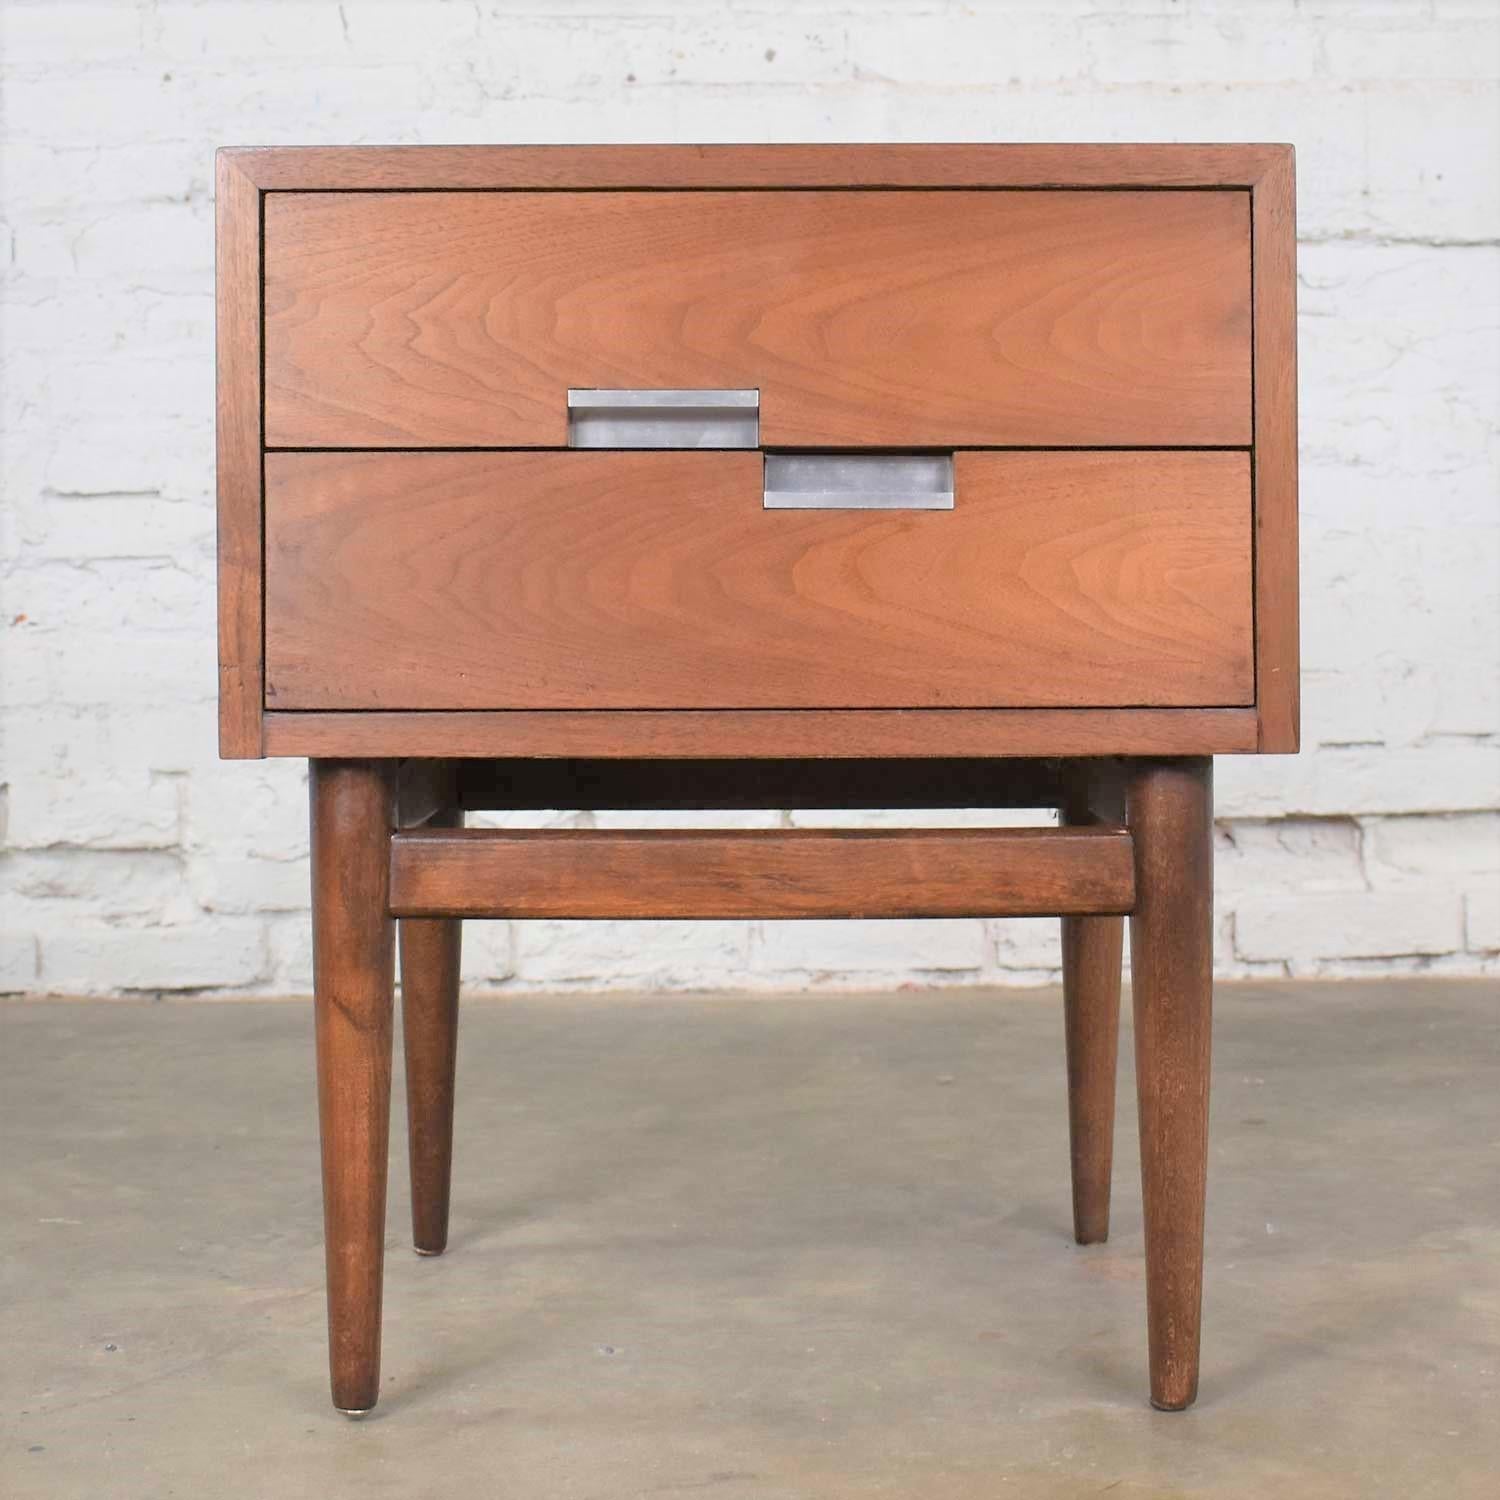 Handsome nightstand or end table from American of Martinsville and Merton Gershun’s Accord line of furniture with their signature X’s and asymmetric handles. It is in wonderful restored condition with no outstanding flaws. It does have normal signs